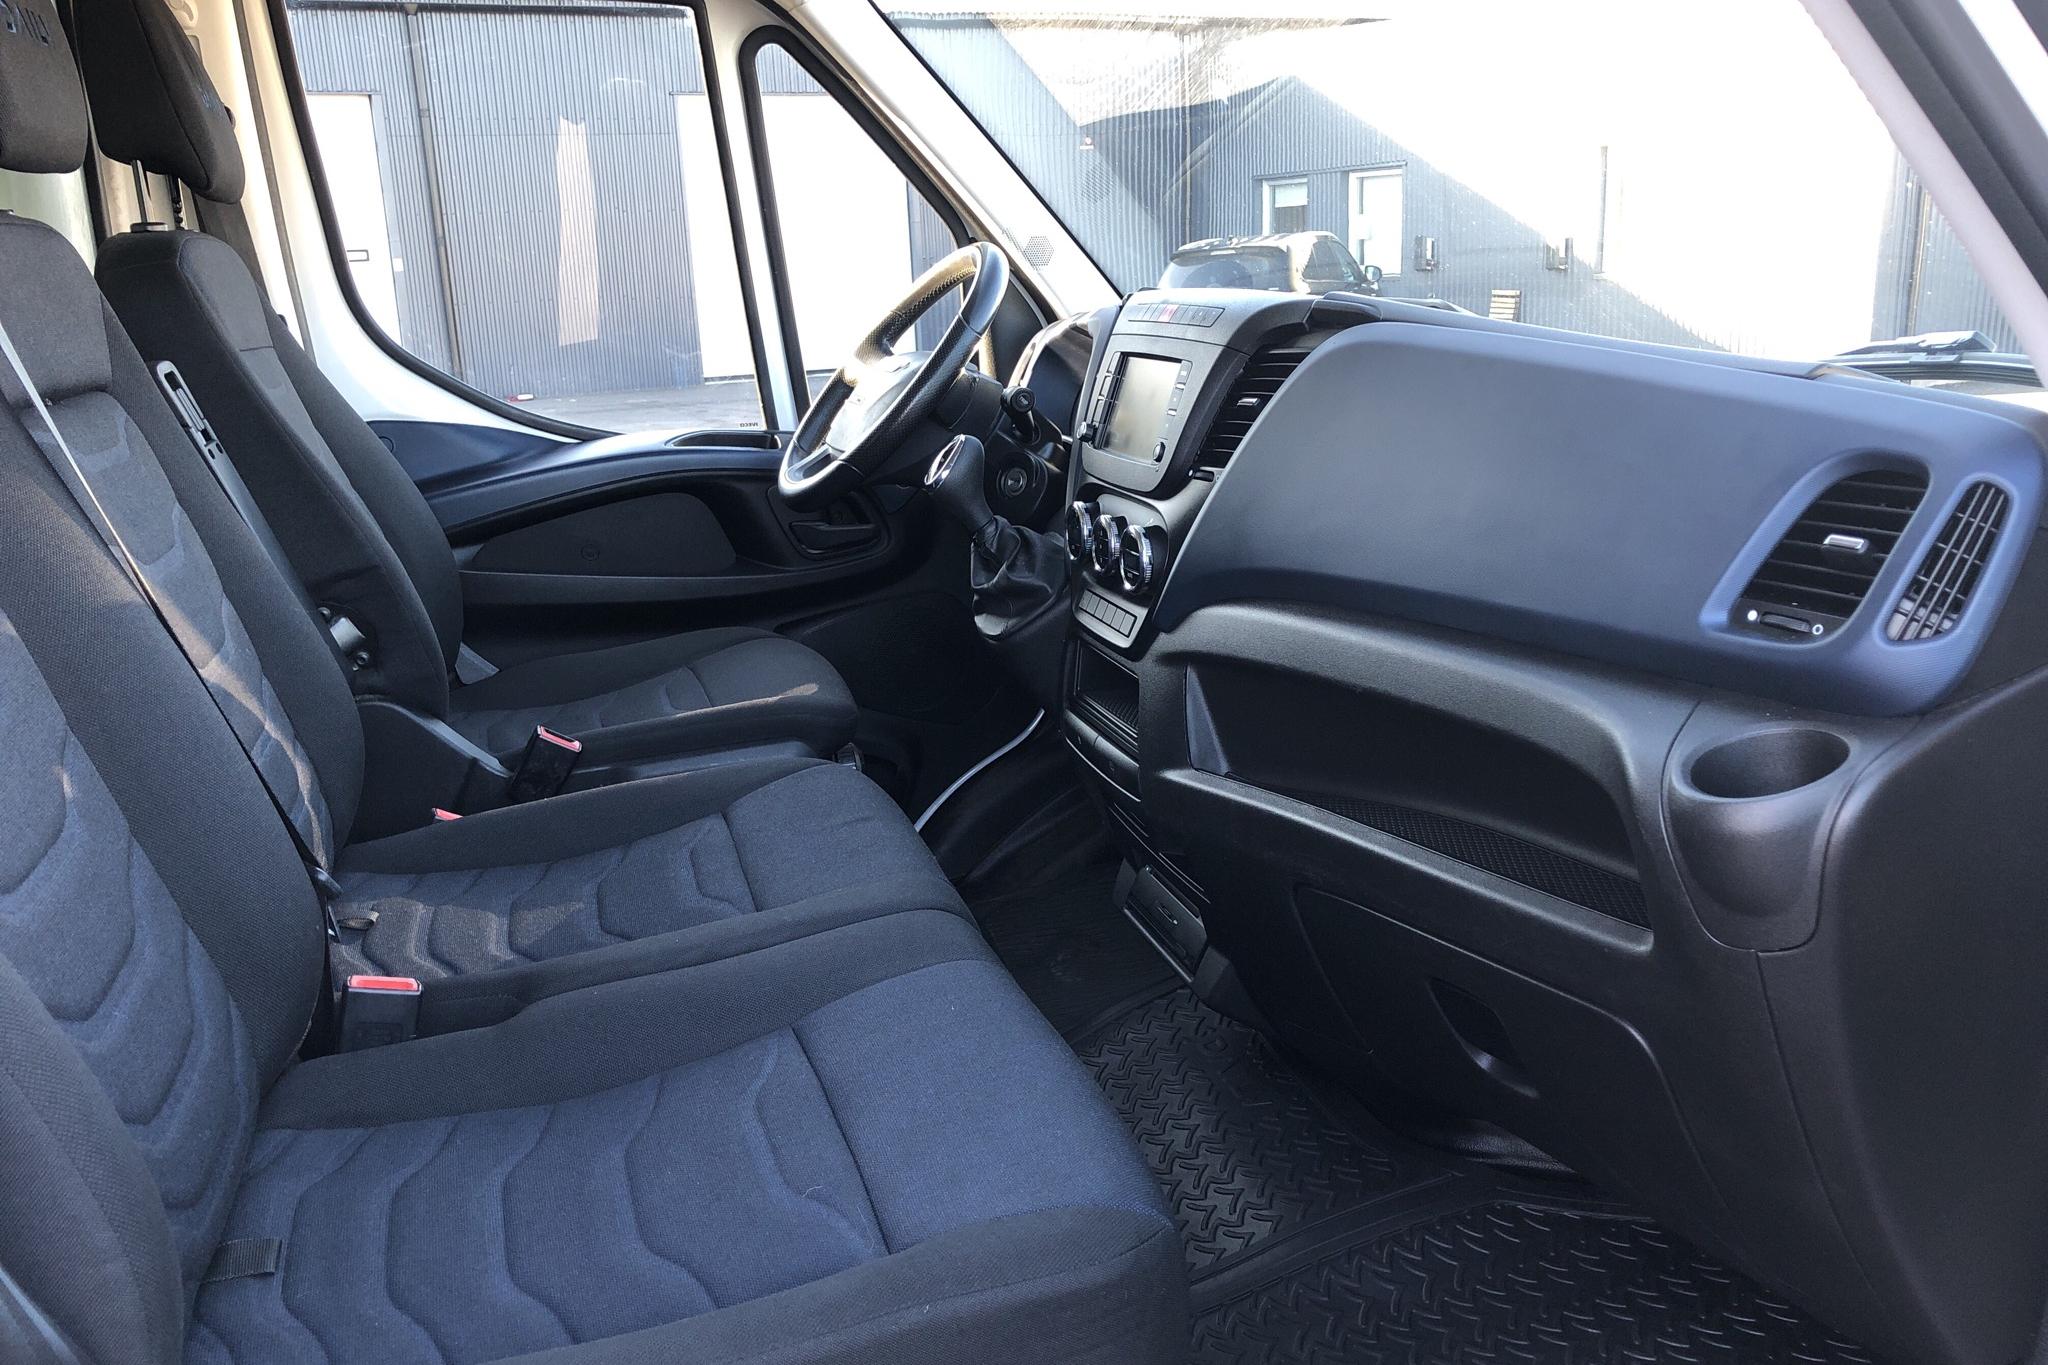 Iveco Daily 35 2.3 (156hk) - 236 580 km - Automatic - white - 2018